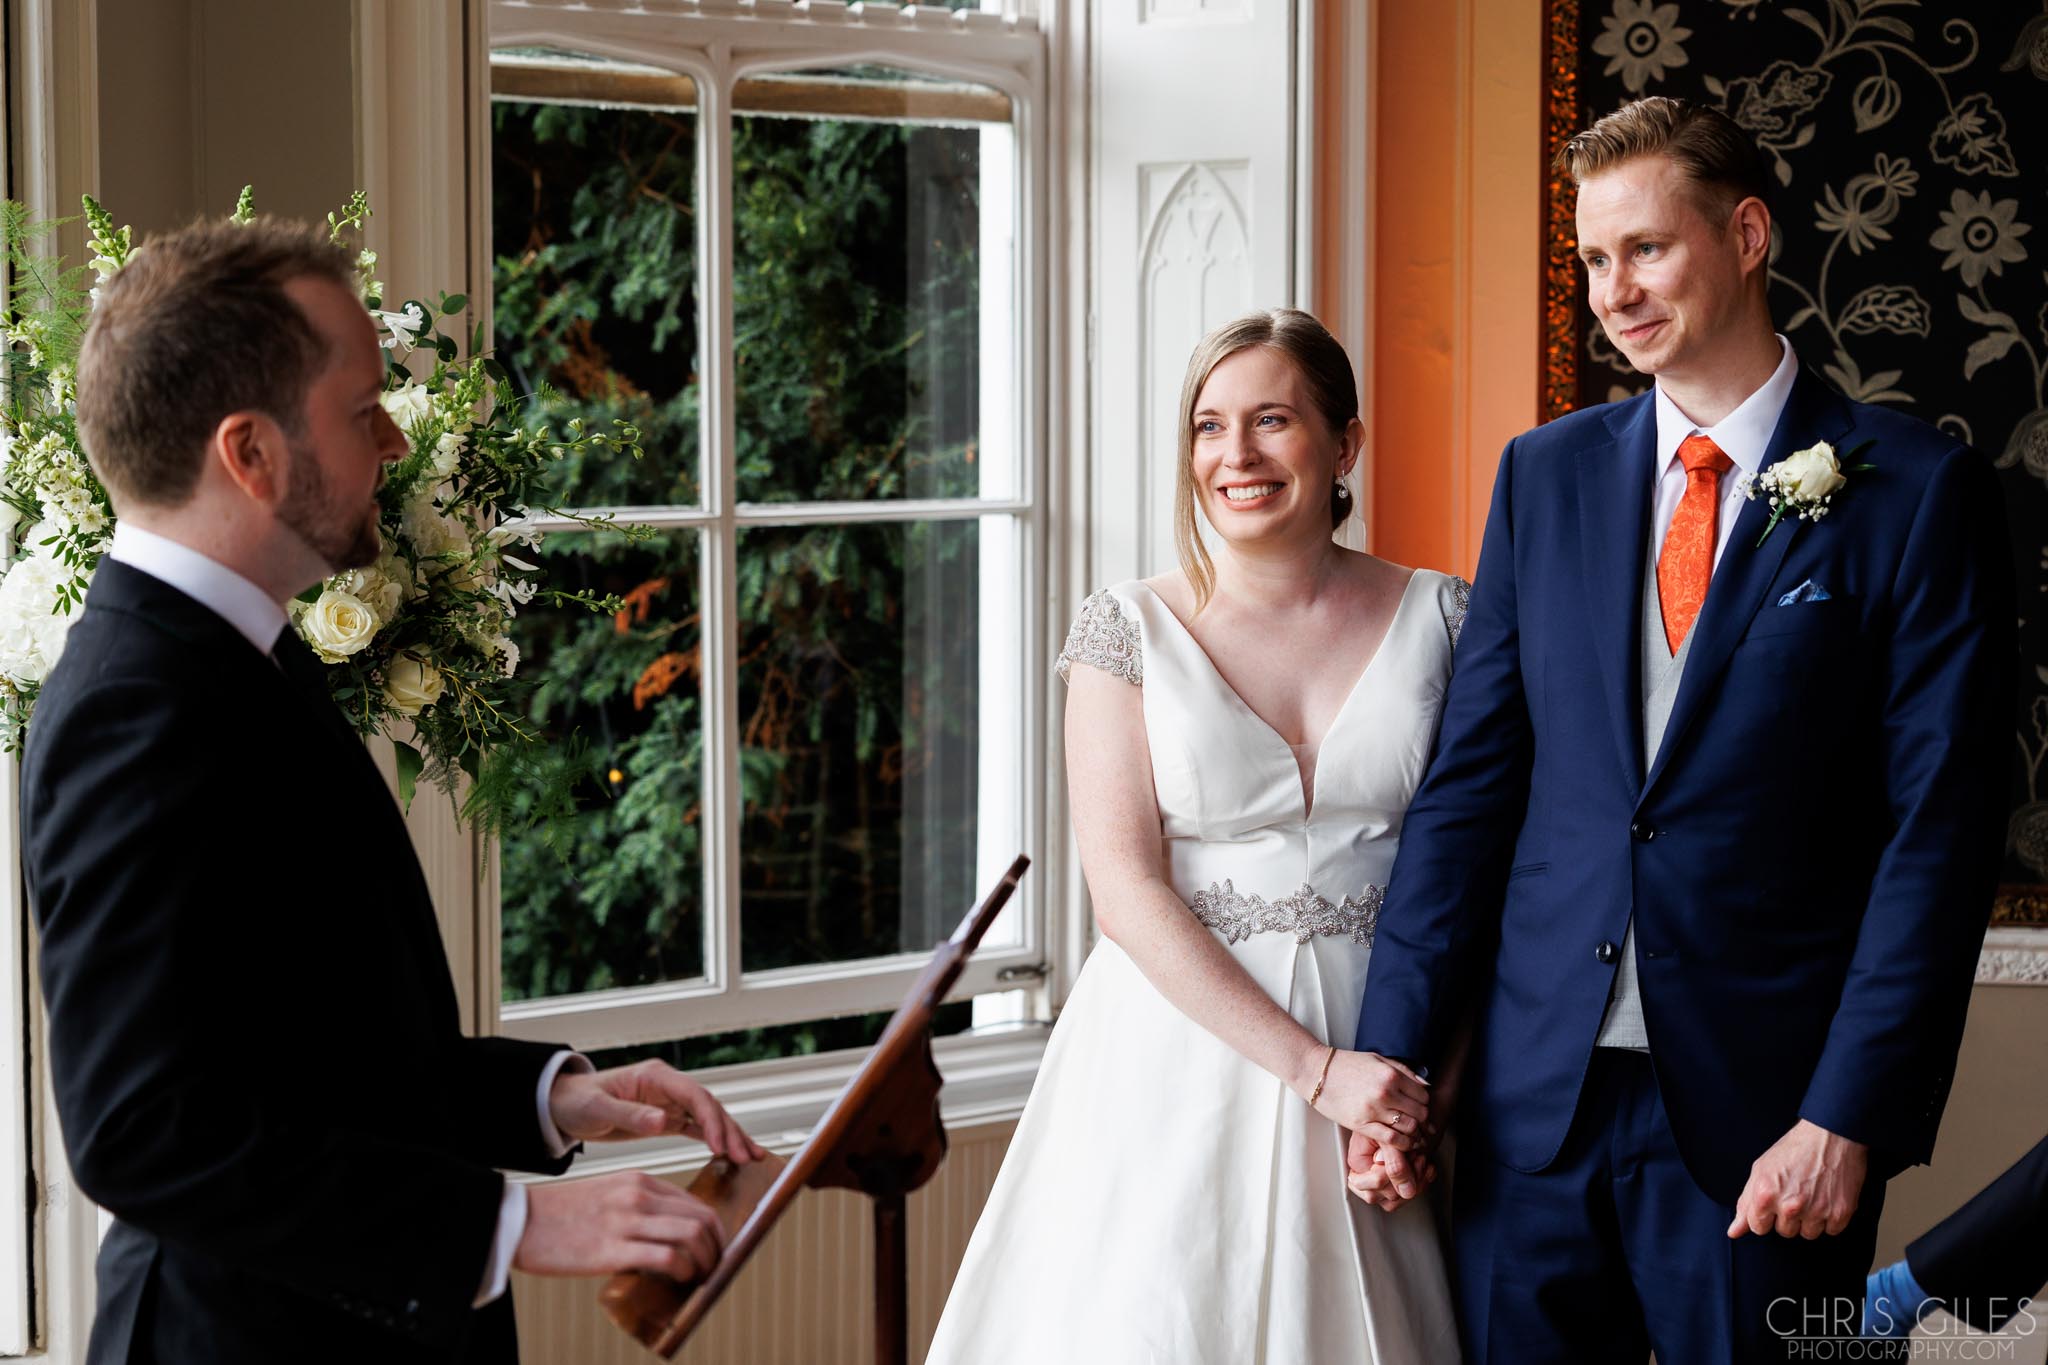 Wedding ceremony at Nonsuch Mansion